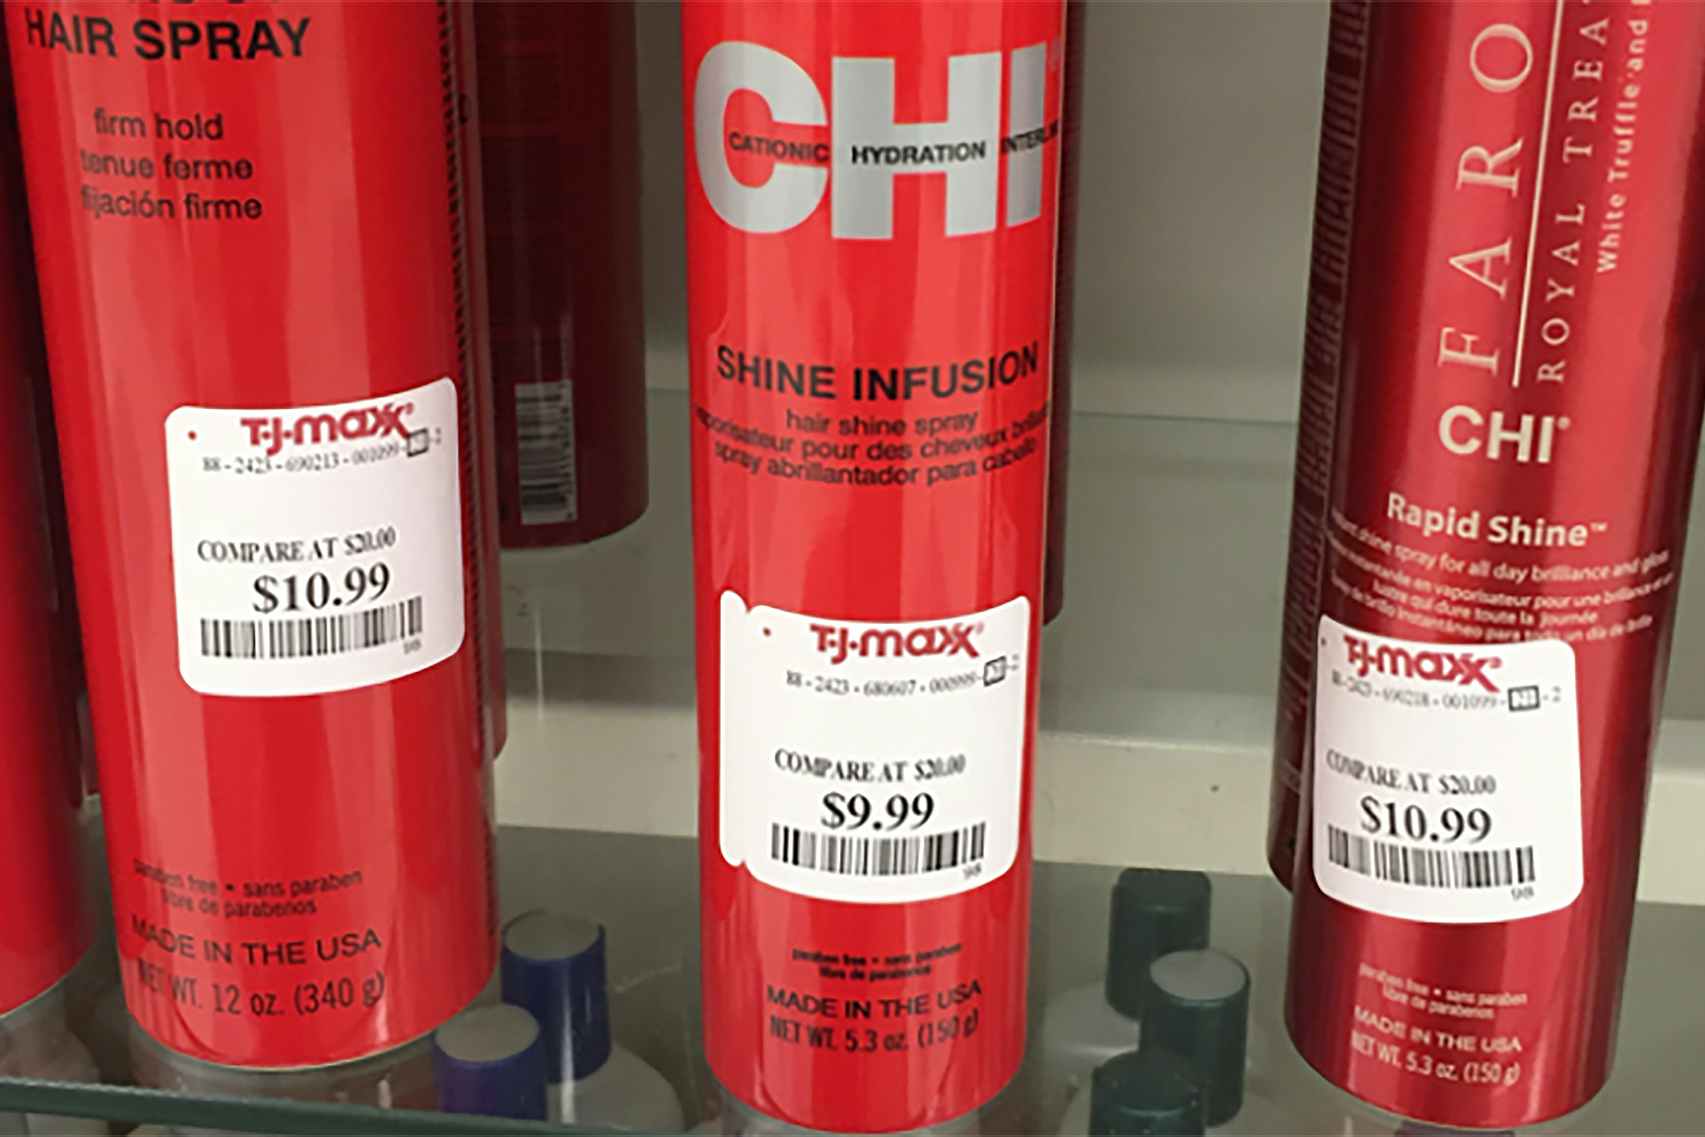 Cans of Chi Hair Spray with T.J. Maxx price tags.